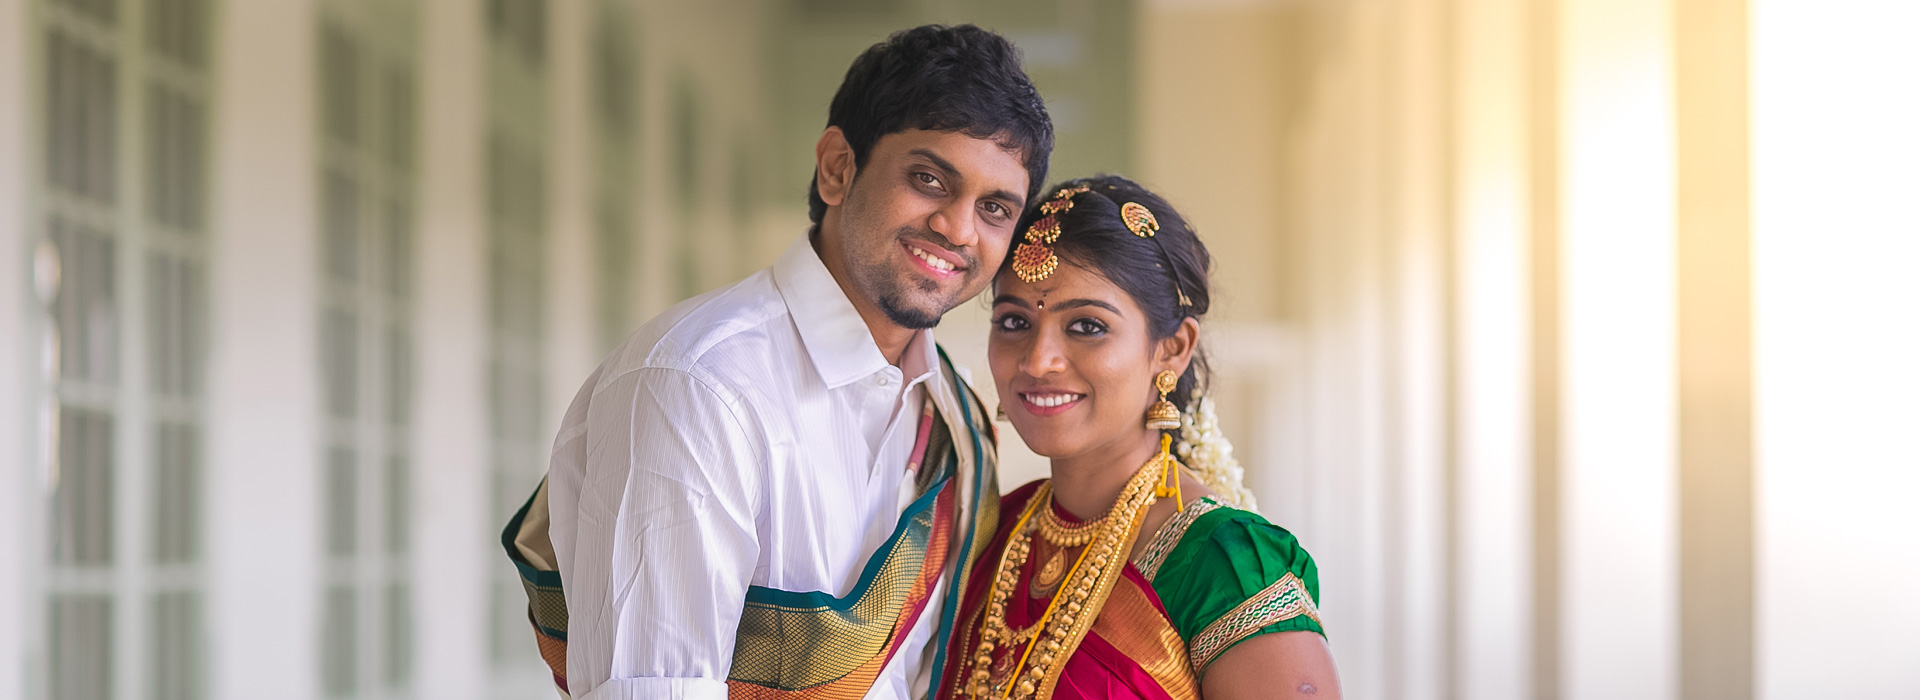 Tamil Wedding Pictures | Download Free Images on Unsplash